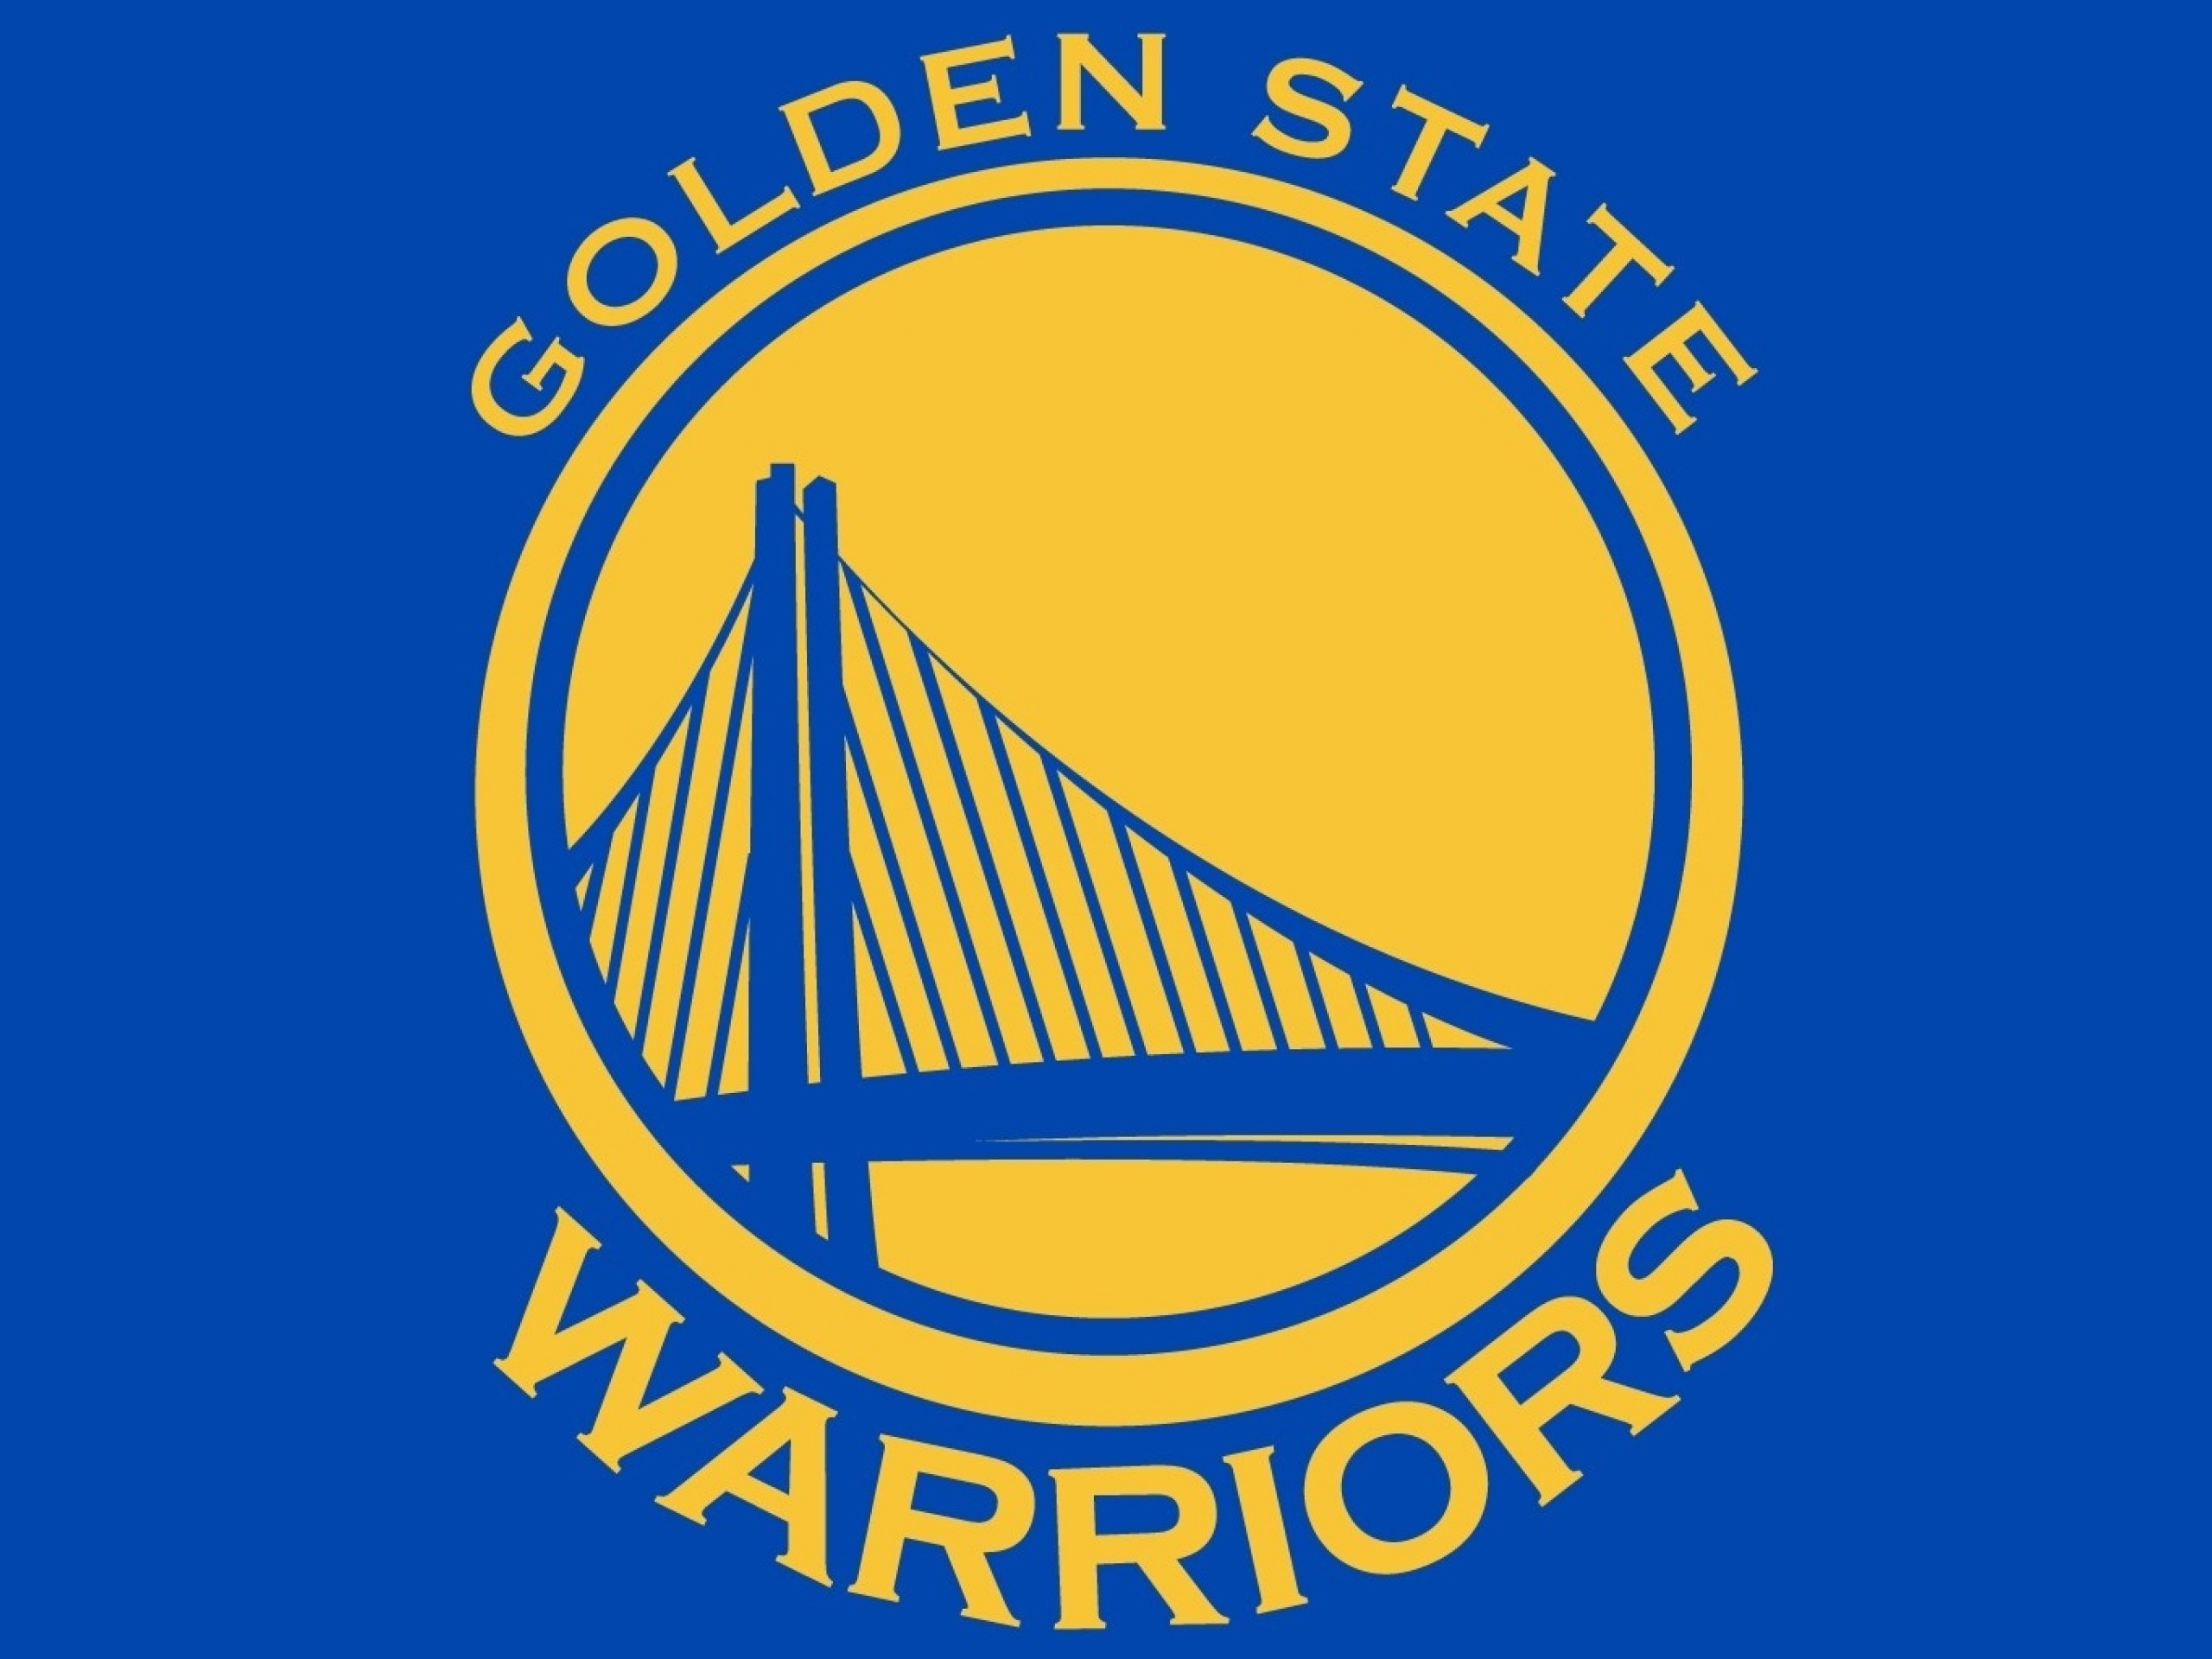 Golden State Warriors in the game 